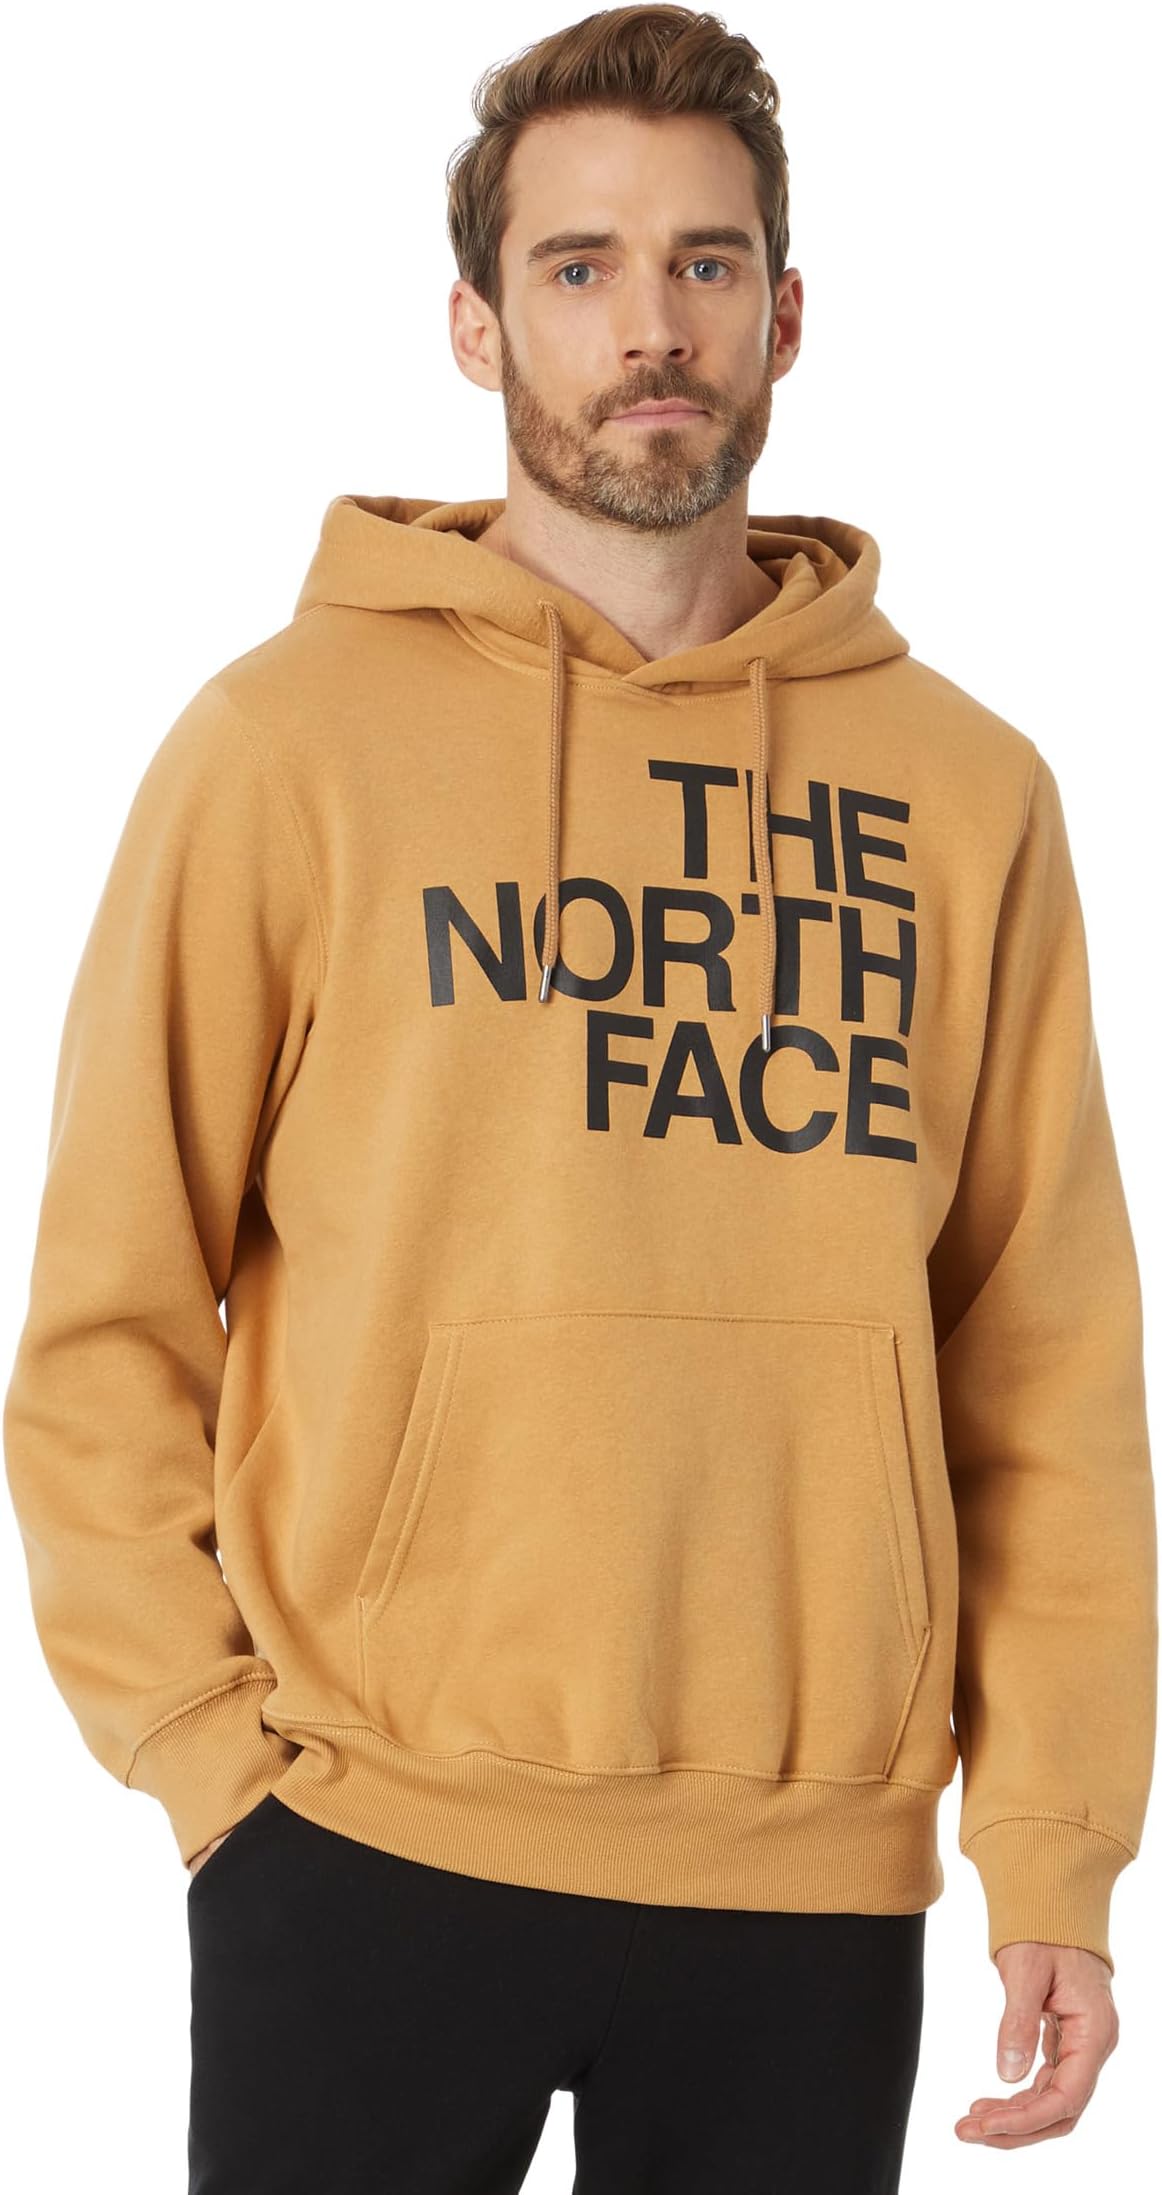 Толстовка с брендом Proud The North Face, цвет Almond Butter/TNF Black куртка the north face freedom insulated цвет tnf black almond butter